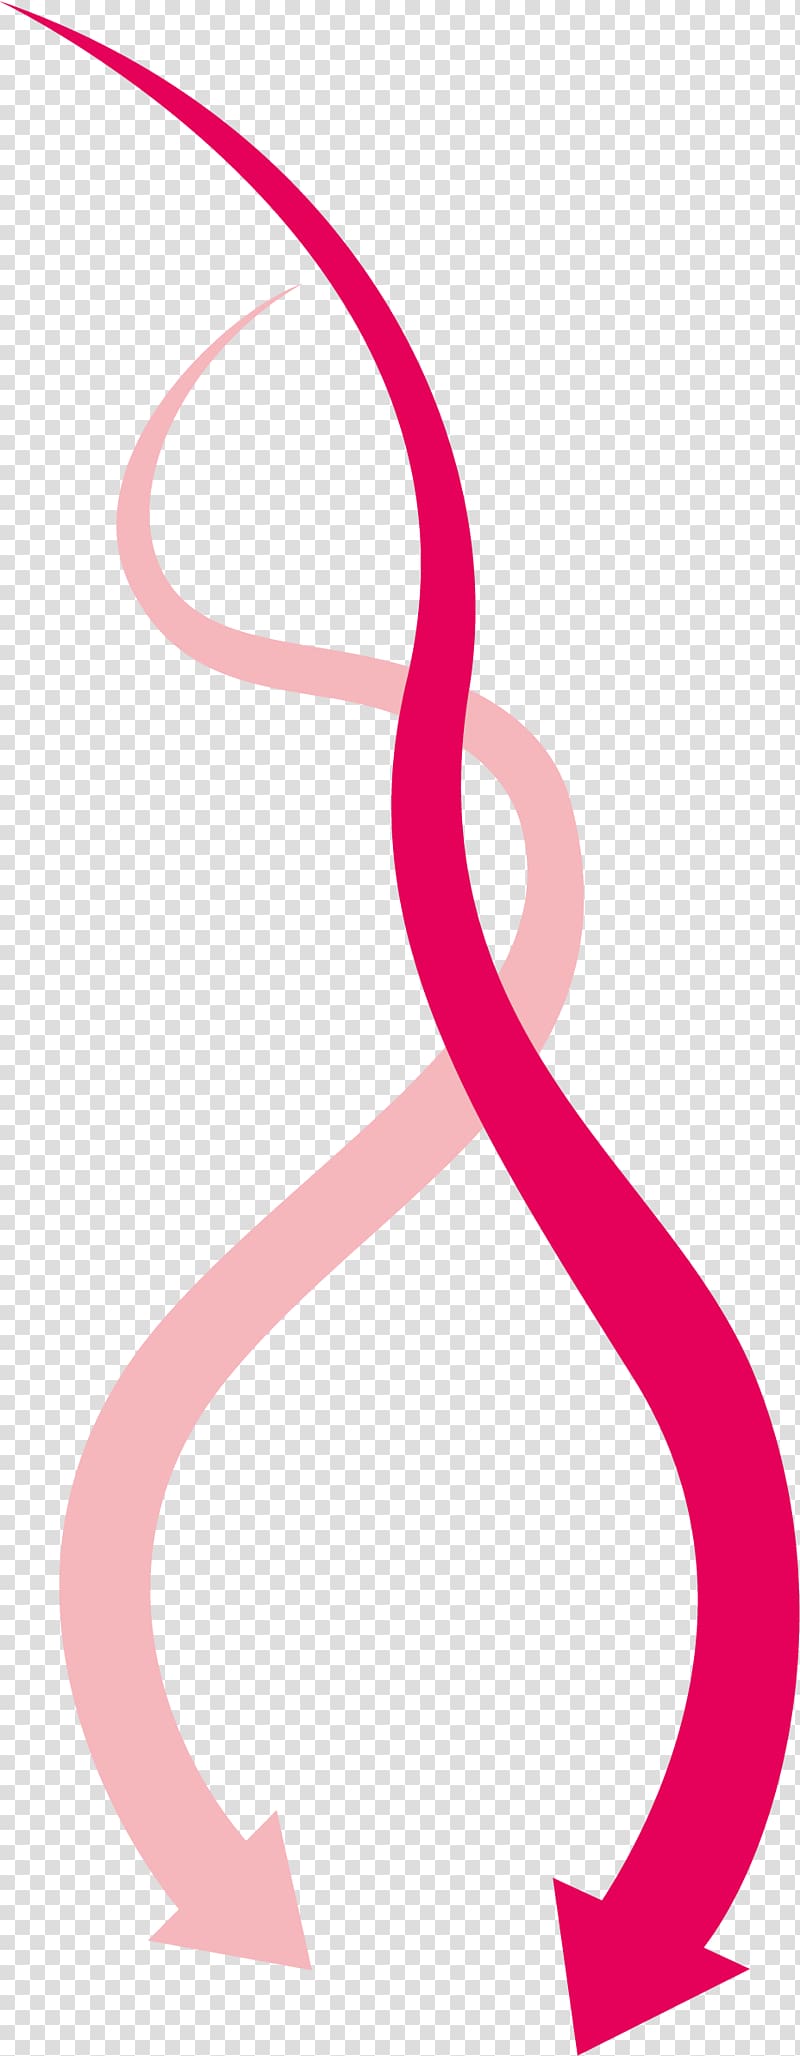 red and pink curved arrow , Arrow , Curved Arrow Tool transparent background PNG clipart